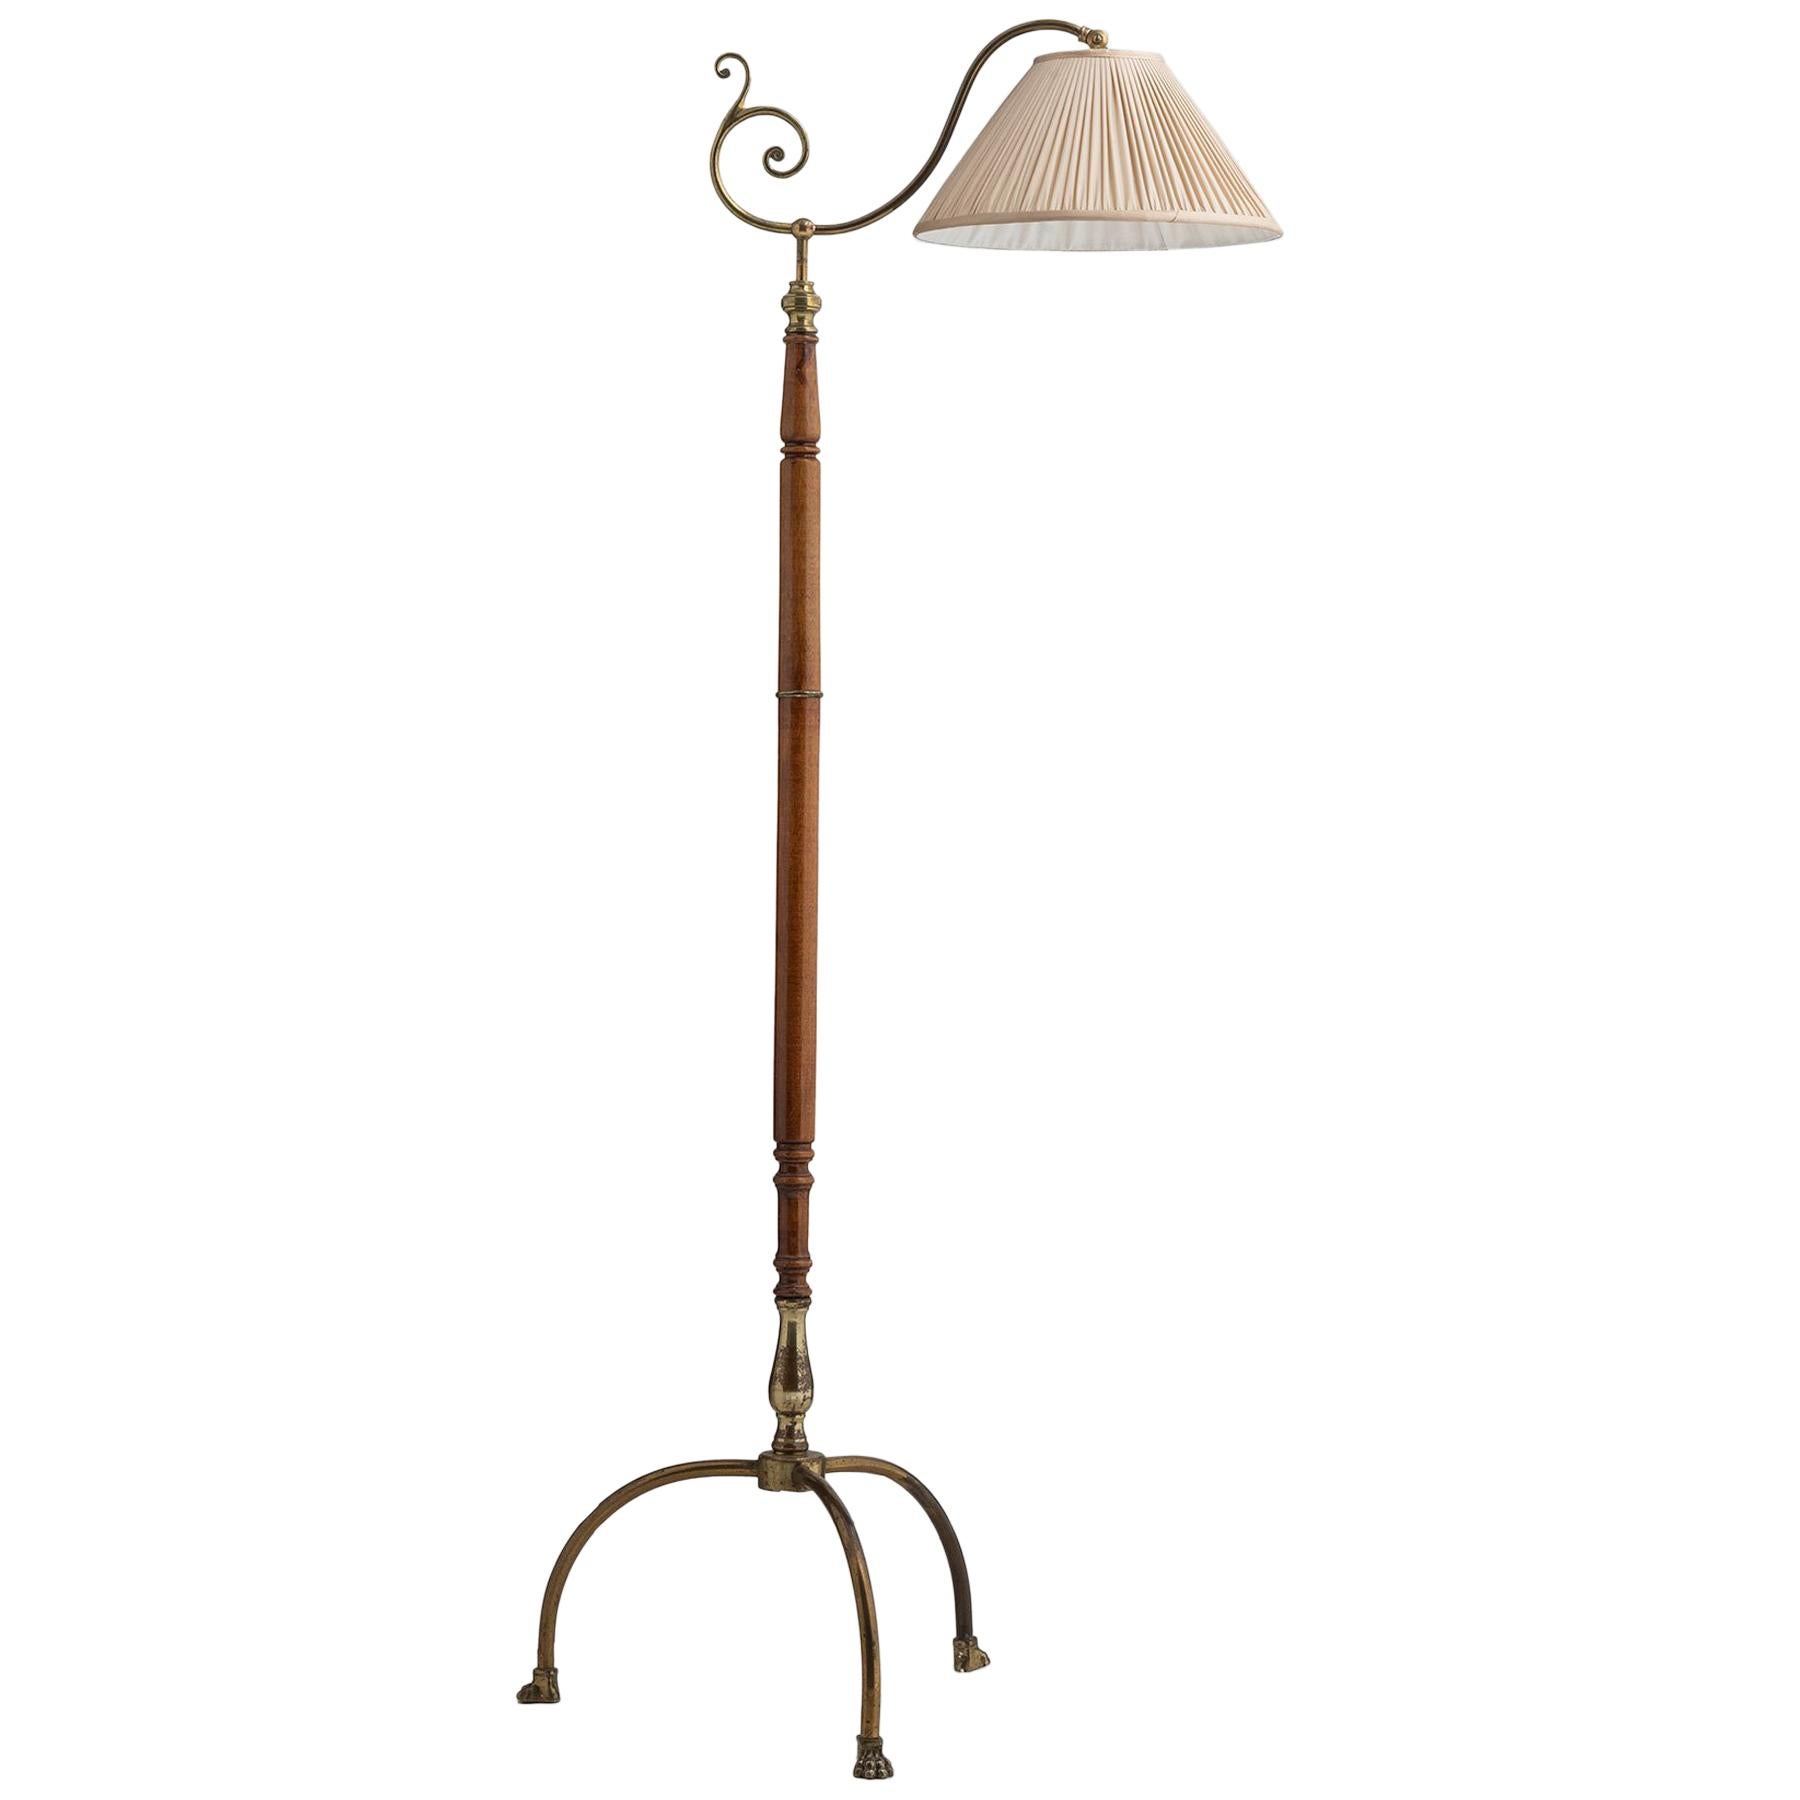 Adjustable Reading Lamp with Claw Feet, France, circa 1930